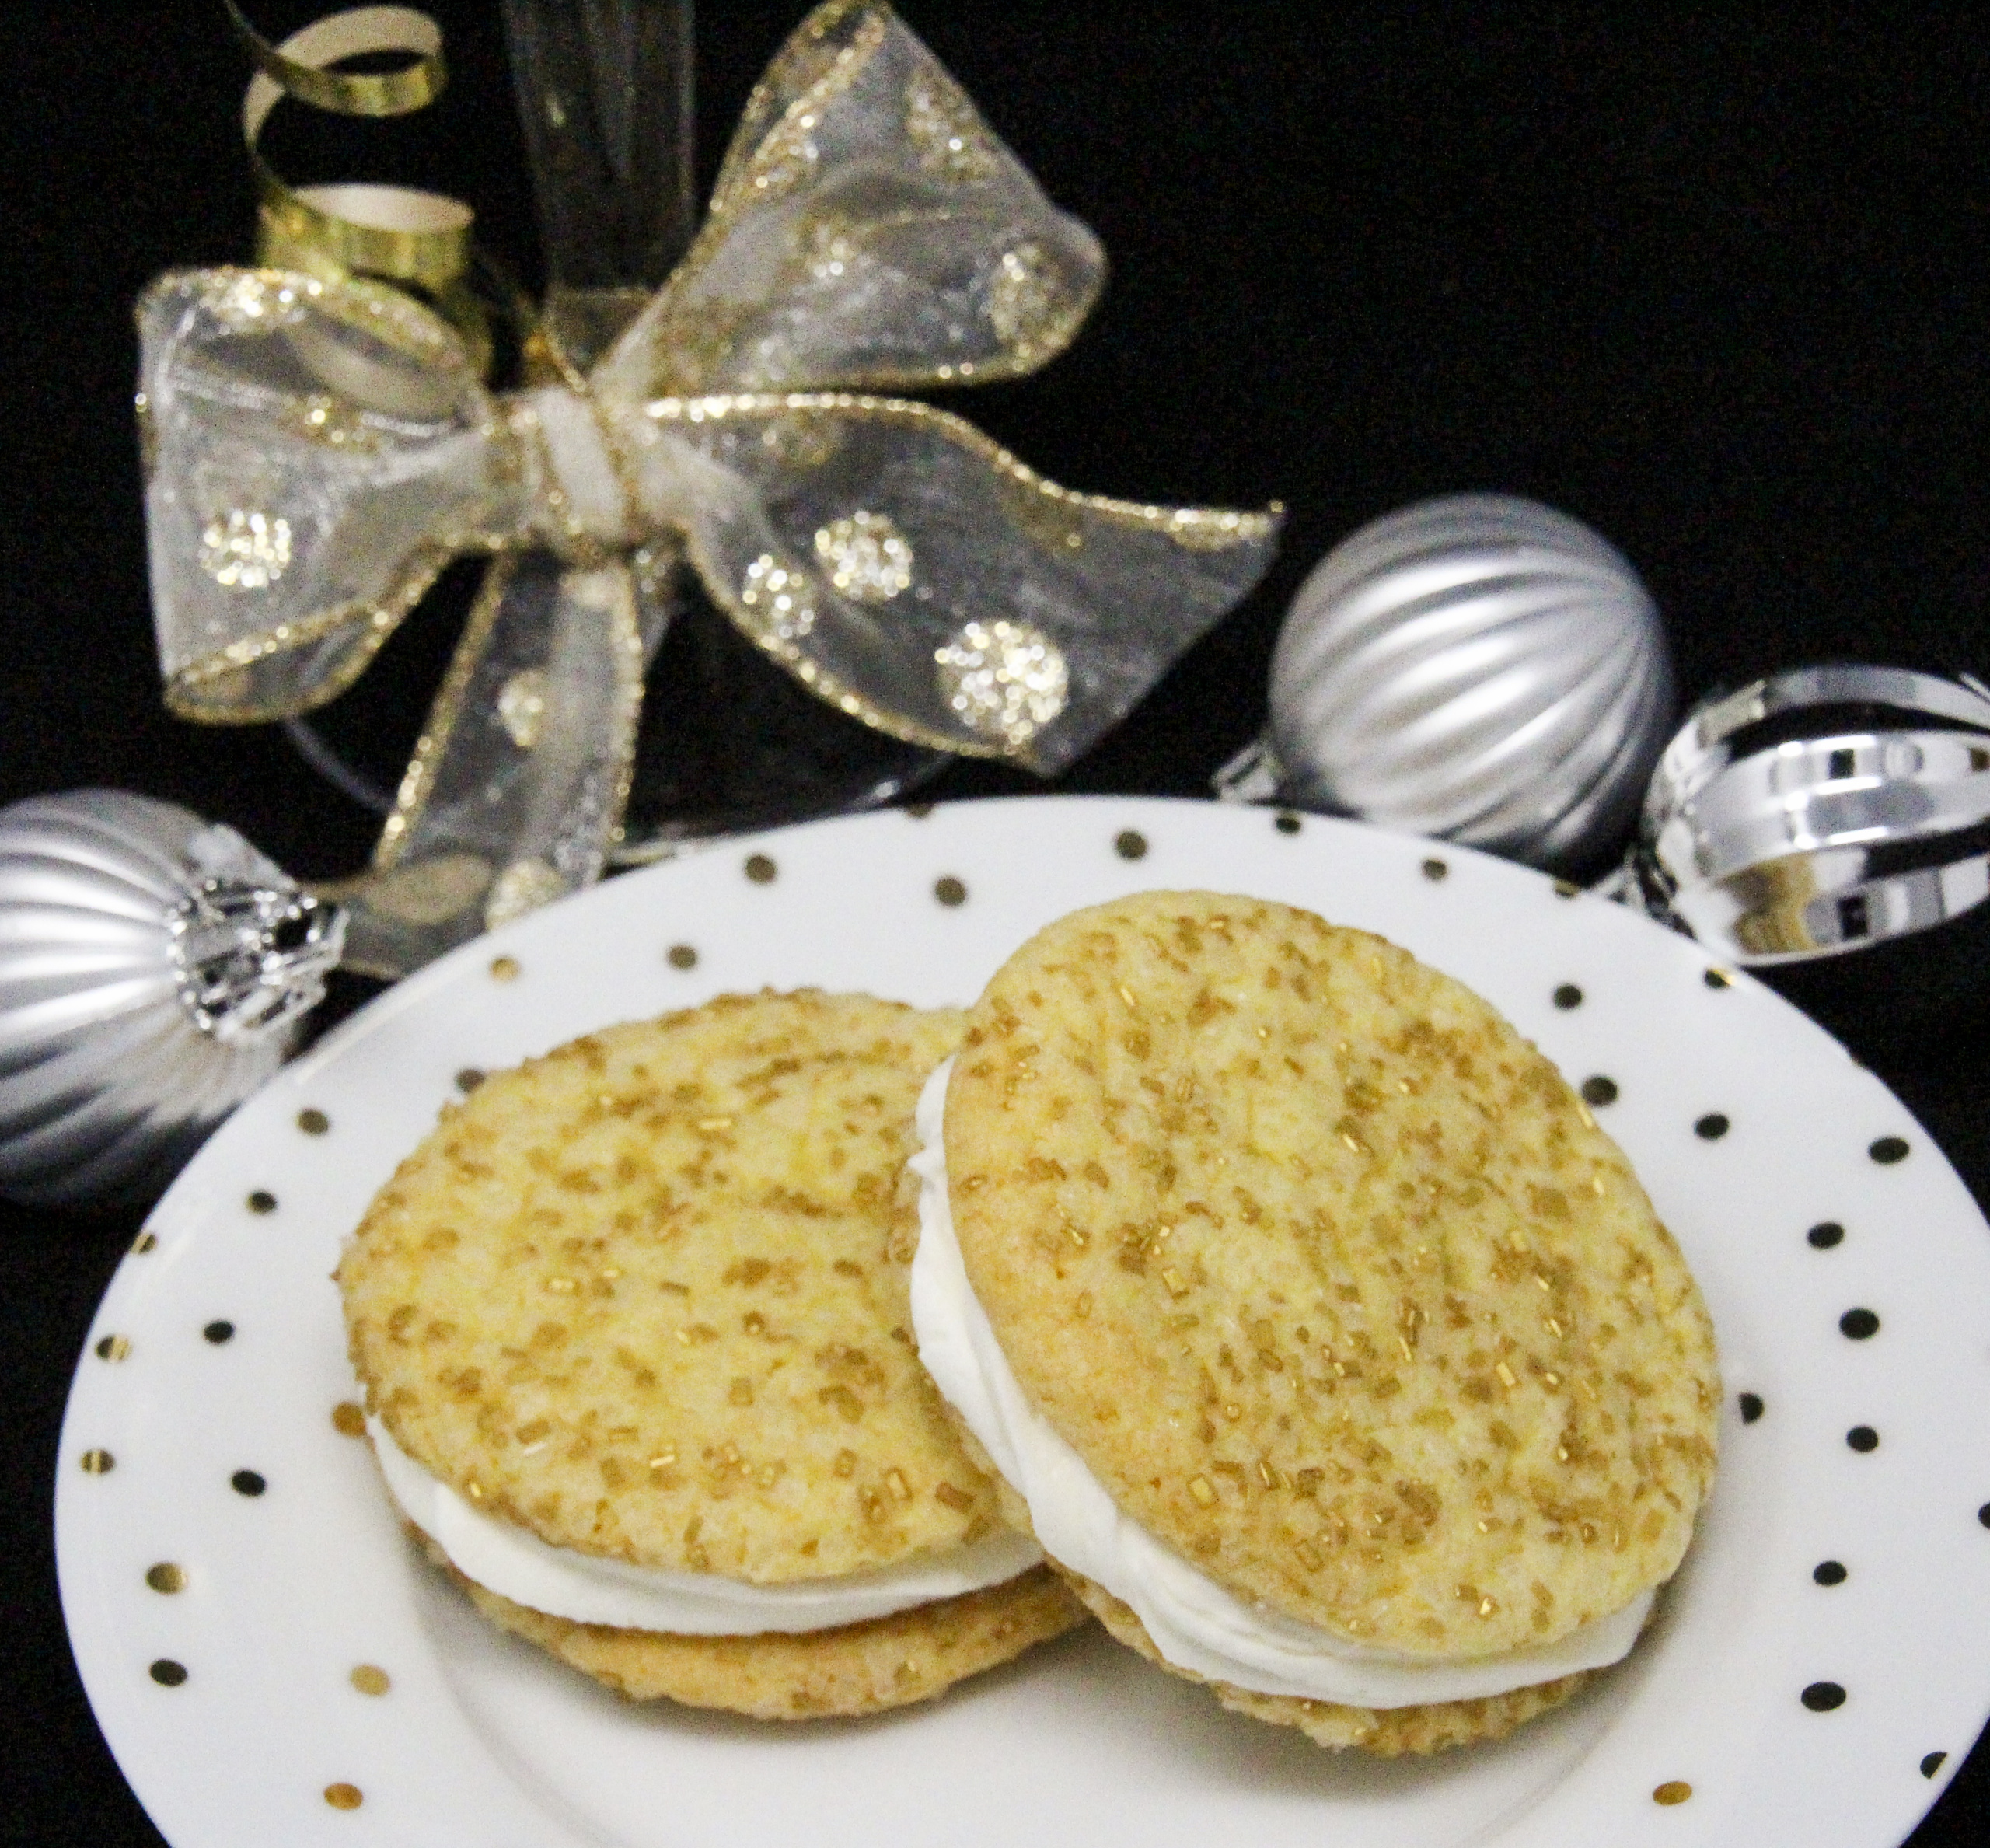 Champagne Crème Sandwich Cookies are soft-style cookies flavored with champagne and a layer of champagne-flavored buttercream. With sparkling white and gold sprinkles, these cookies will wow your guests and add a festive touch to your dessert table. Recipe created by Cinnamon & Sugar for BAKE, BATTER, AND ROLL by Catherine Bruns. 